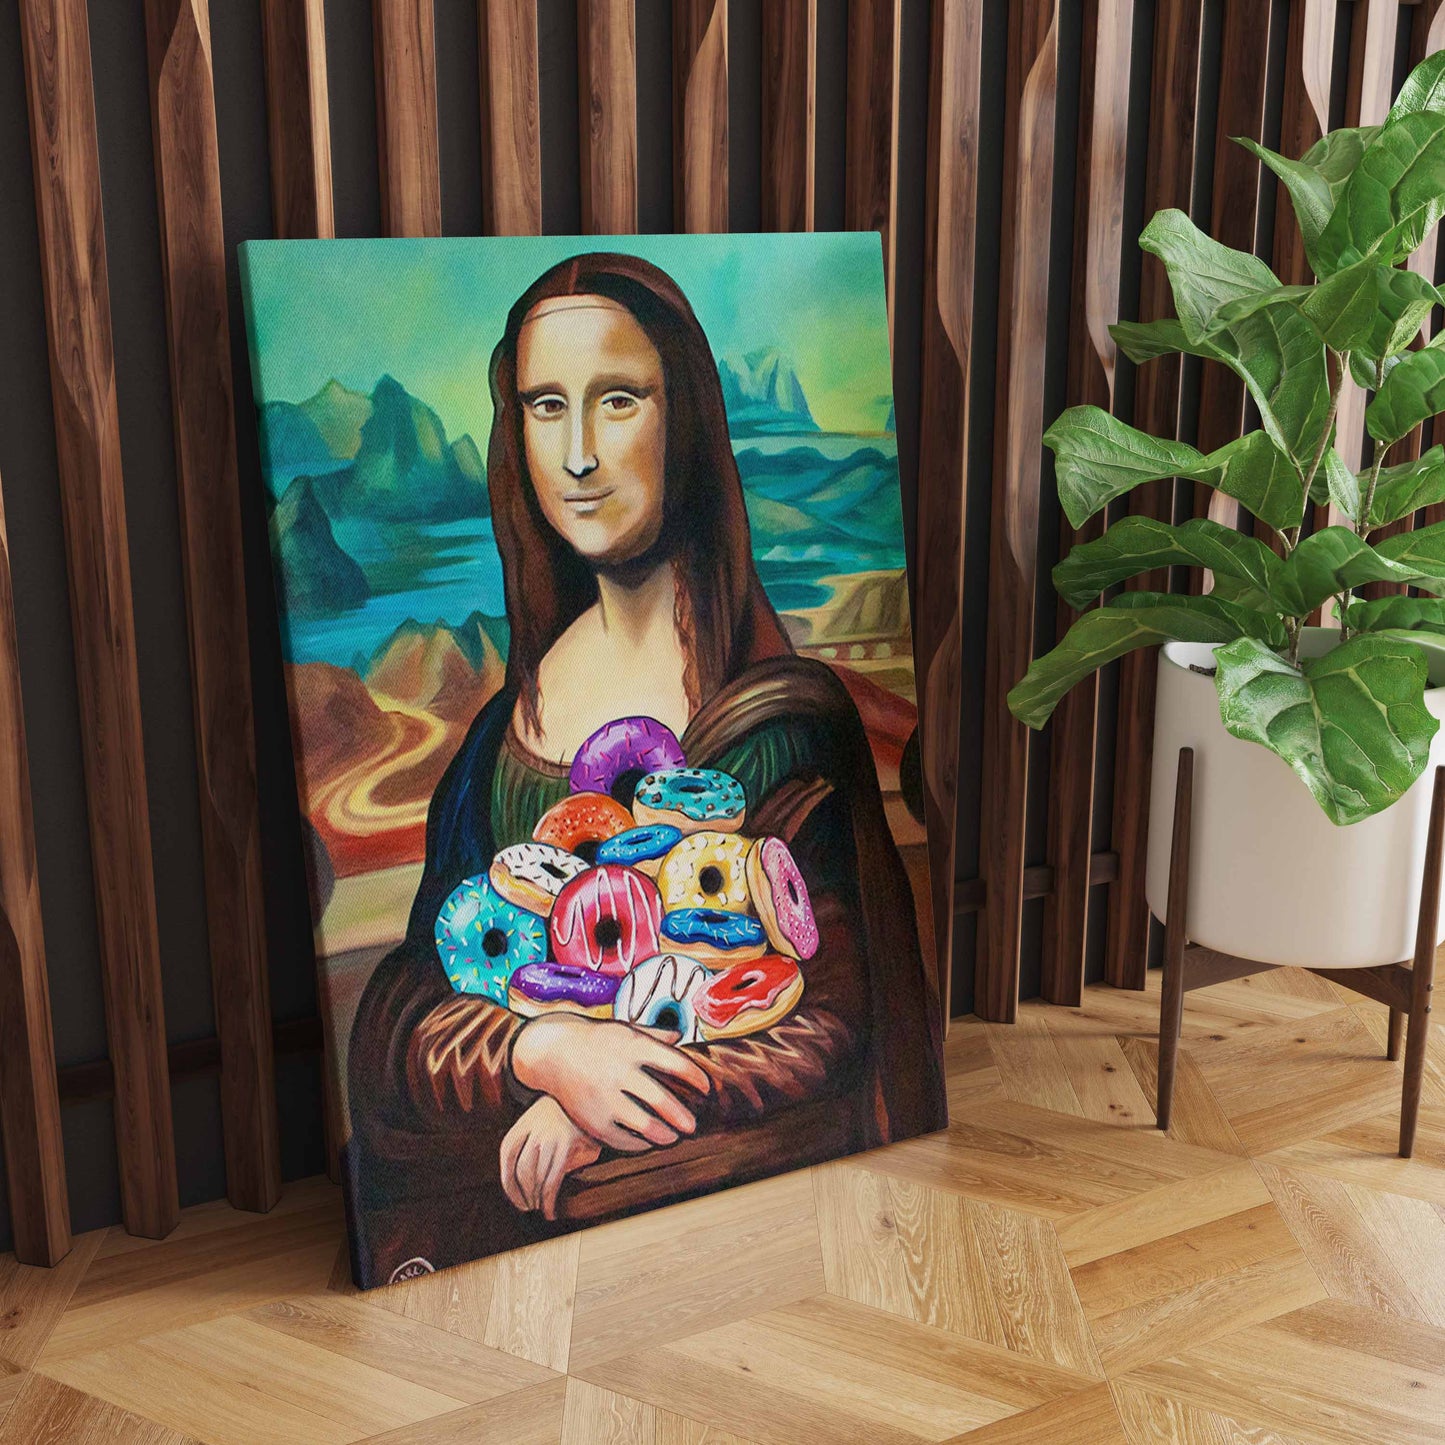 Hilarious Twist, Mona Lisa holding Donuts and Toilet Papers - Funny wall art for Living Room Decor S04E13